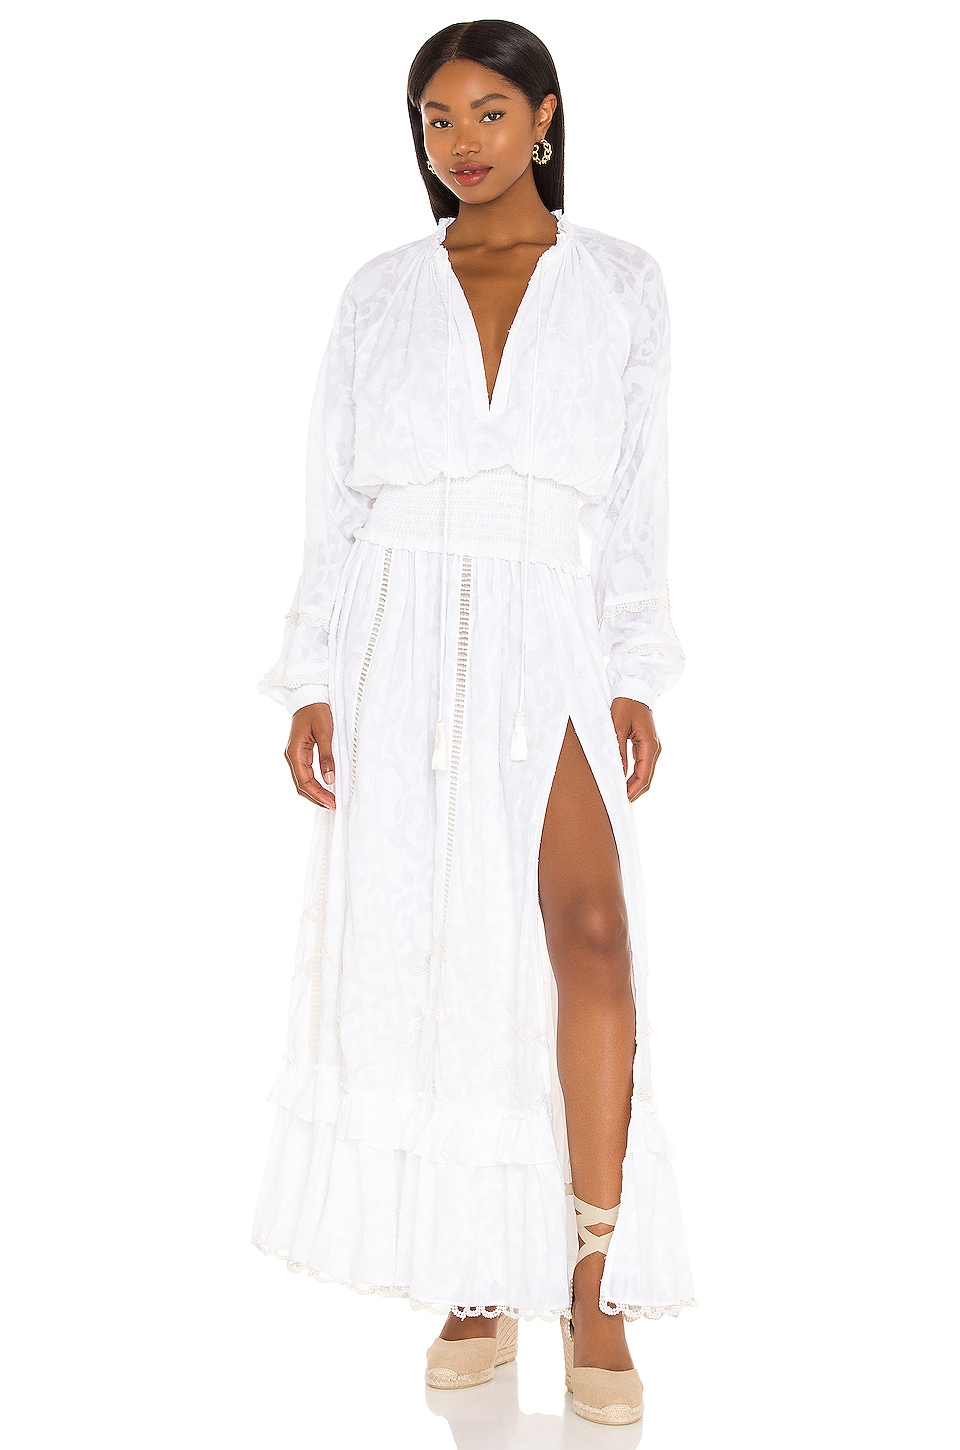 Looking For An Affordable White Boho Beach Dress Under $40